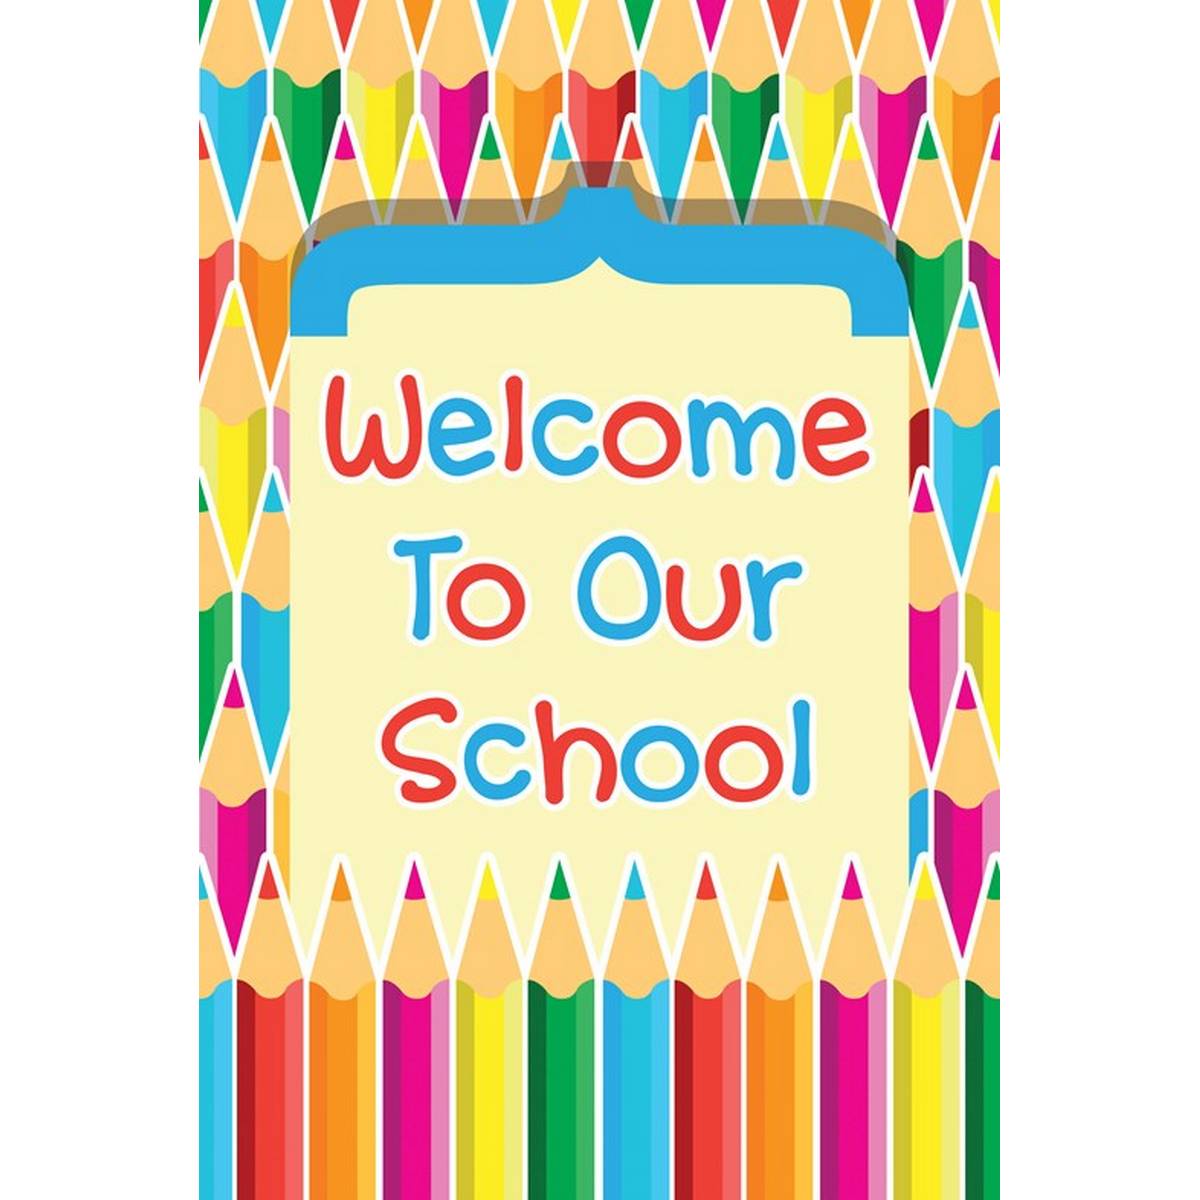 Welcome - Coloured Pencils